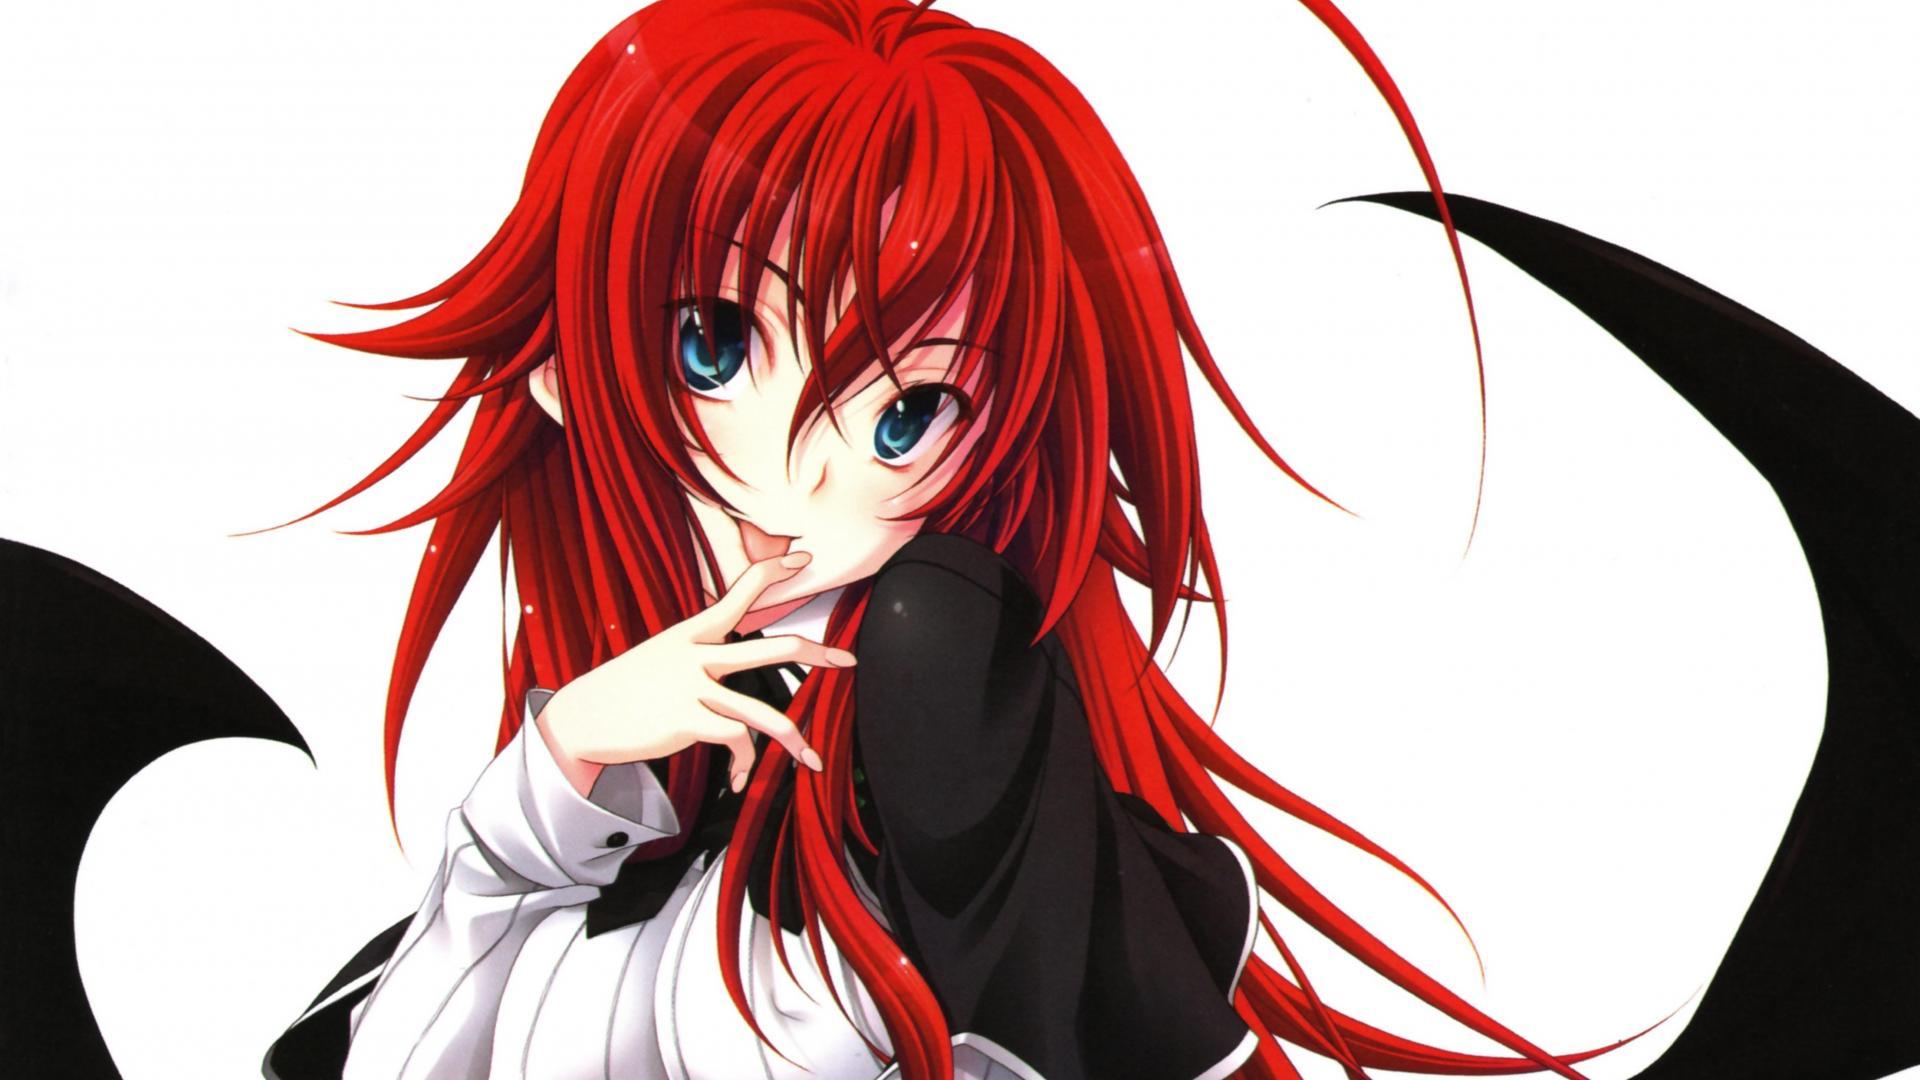 image about High School DxD Gremory